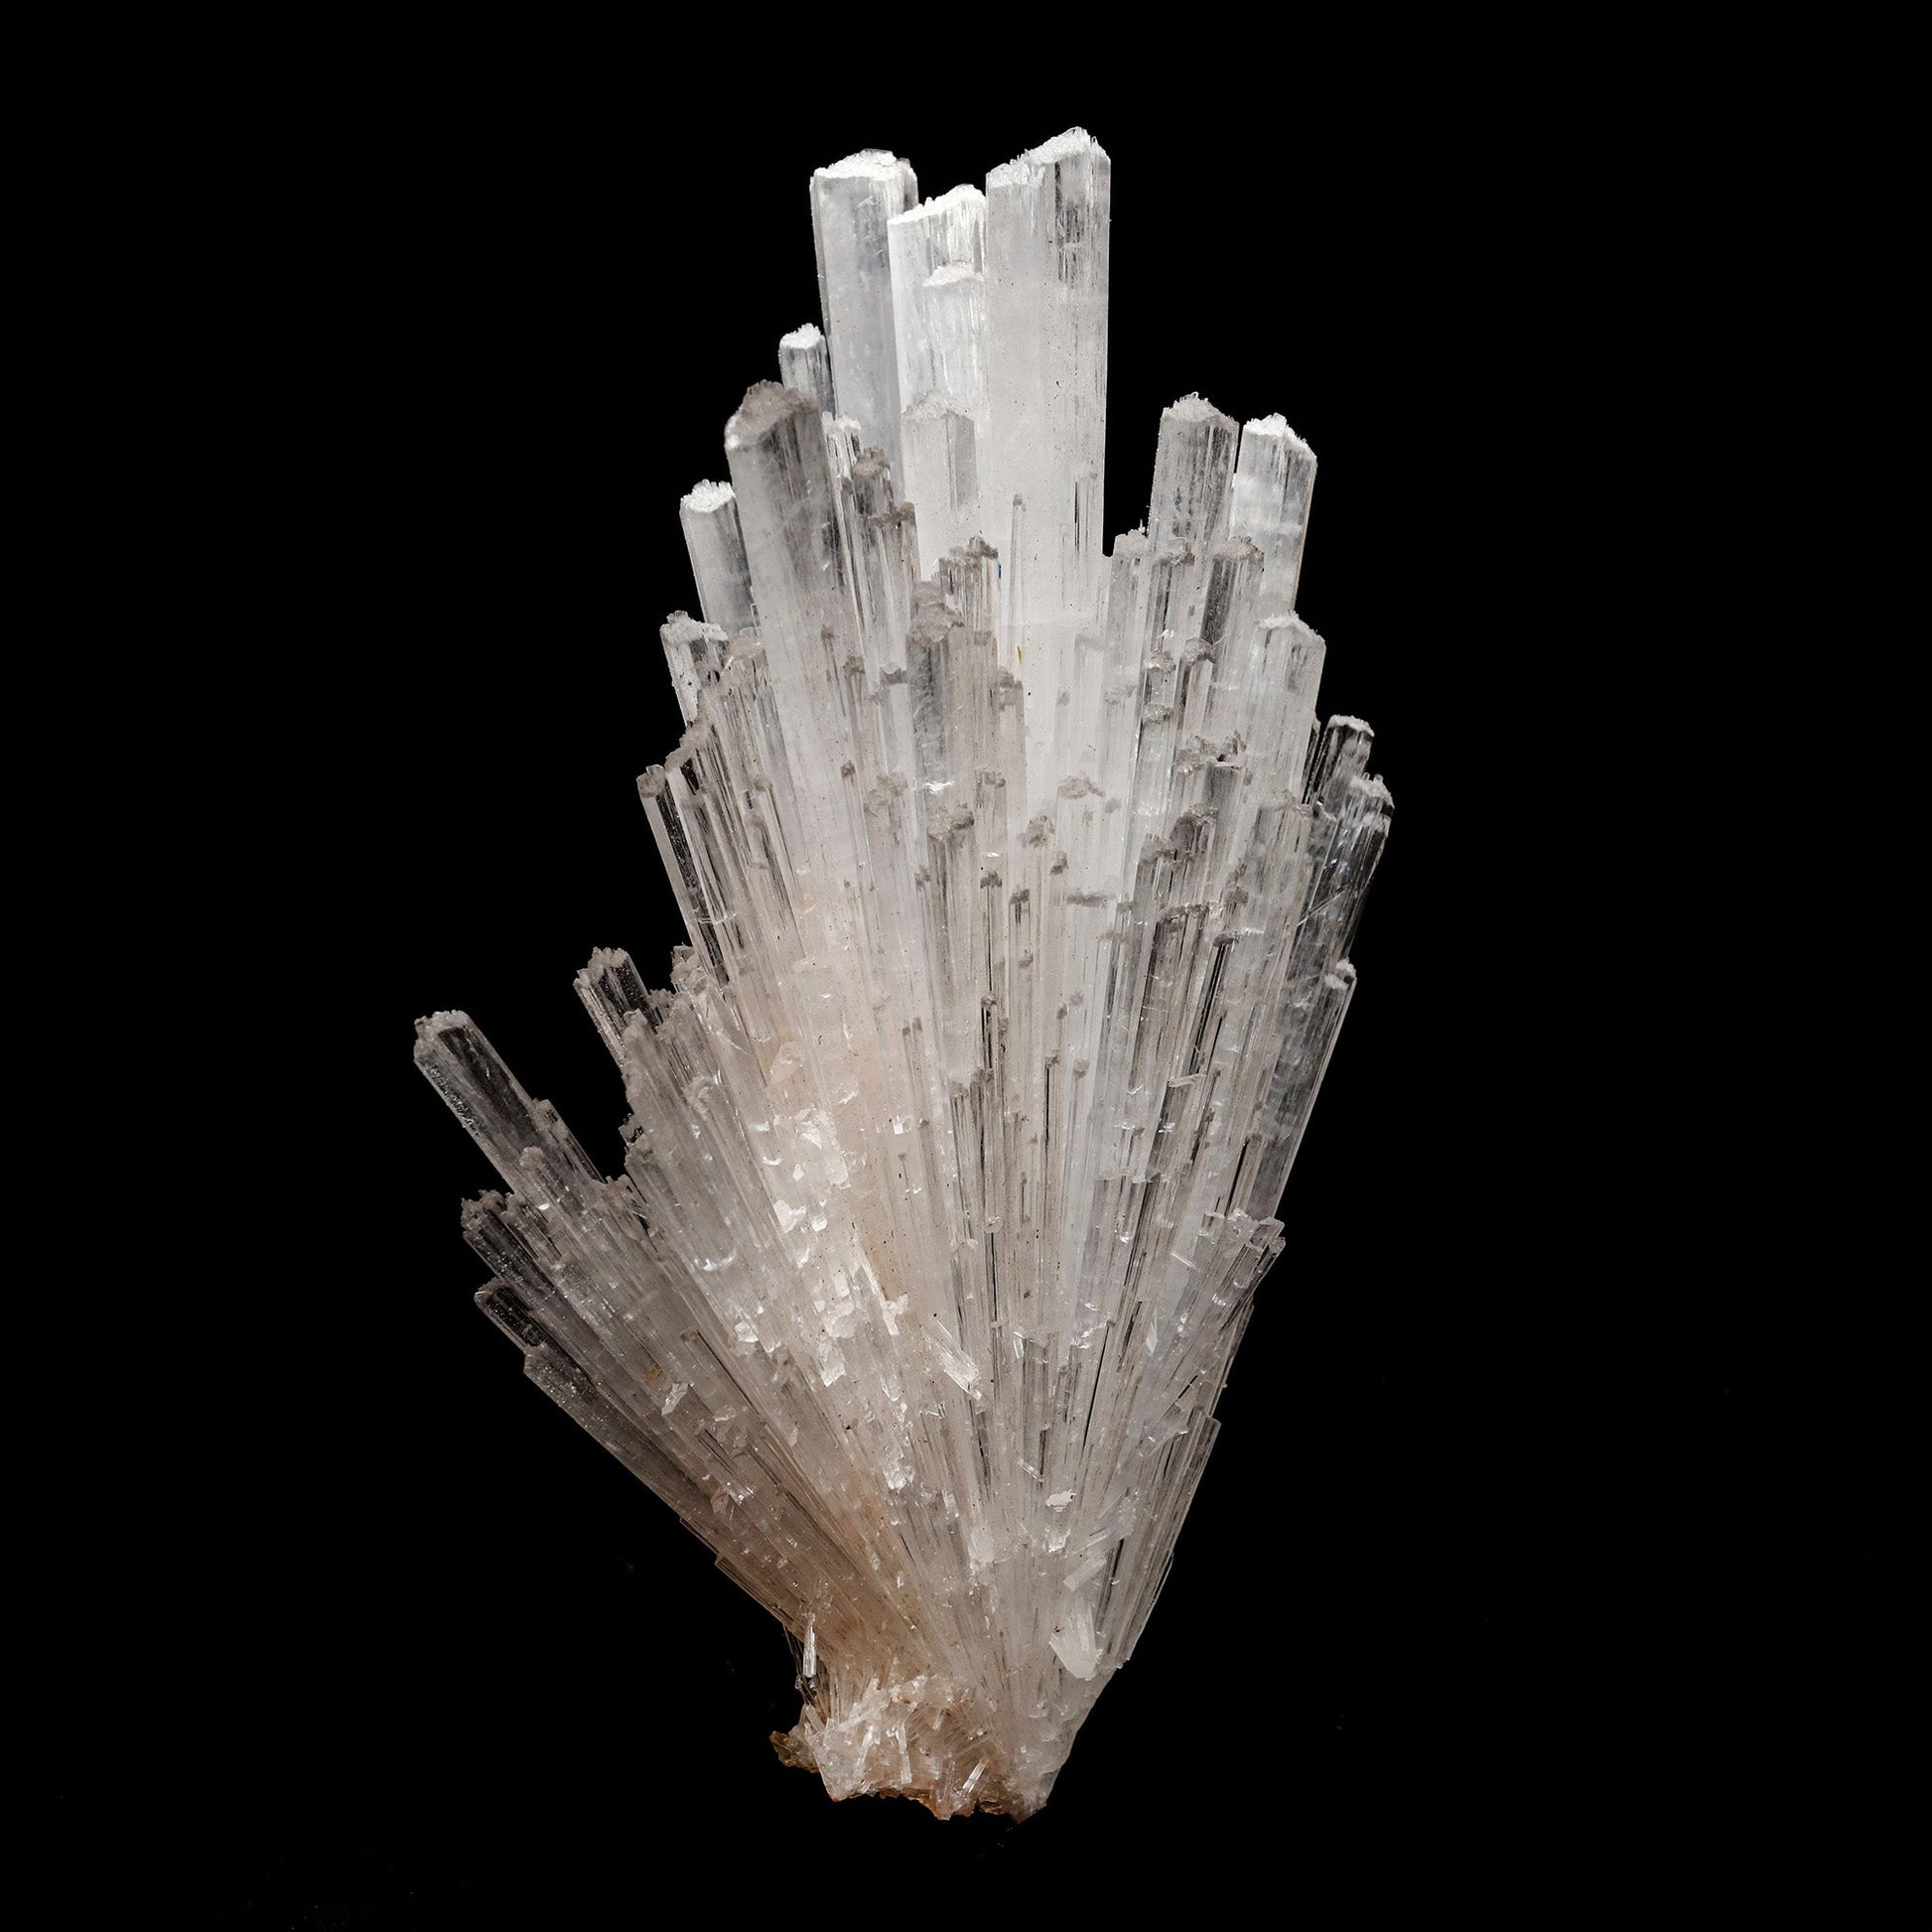 Scolecite Sprays Natural Mineral Specimen # B 5292  https://www.superbminerals.us/products/scolecite-sprays-natural-mineral-specimen-b-5292  Features: Scolecite forms in clusters of sharp, prismatic, “needle-like” points, which often radiate outward from a source, or, alternatively, criss-cross with each other to form sculptures that are truly a natural art form. Scolecite is mainly found in India, although there are also deposits of white scolecite 